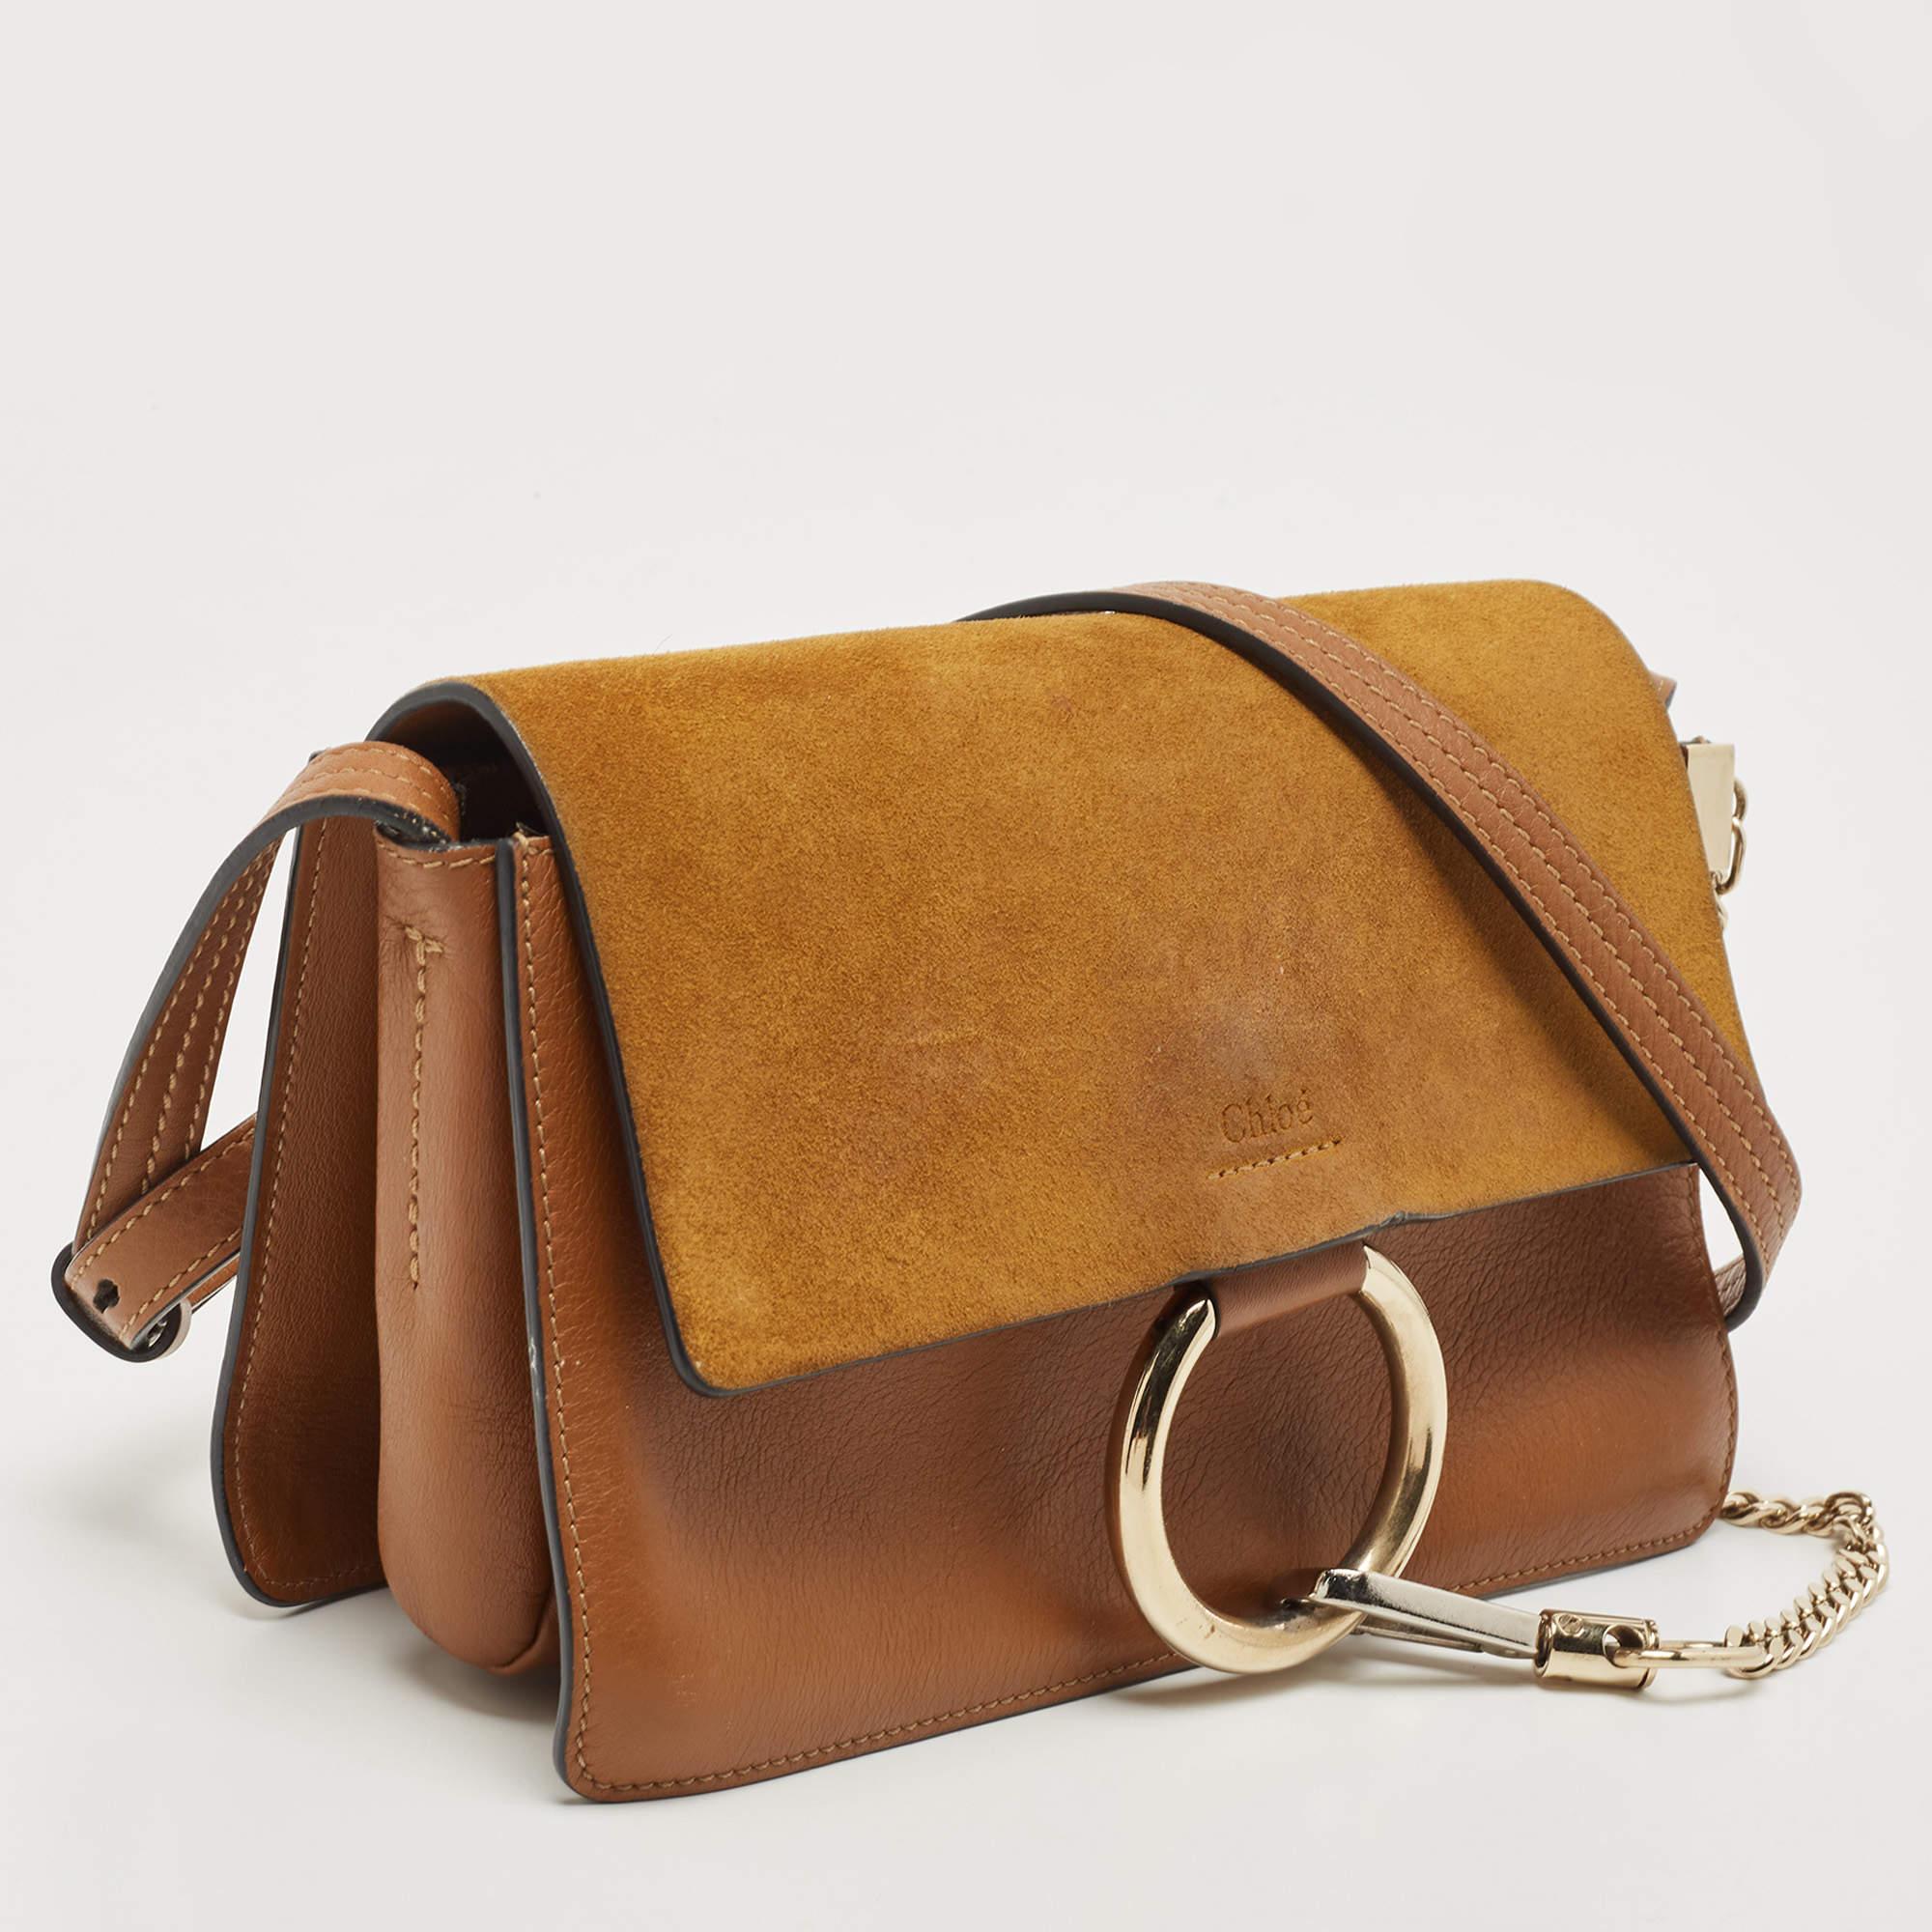 Women's Chloe Brown/Tan Leather and Suede Small Faye Shoulder Bag